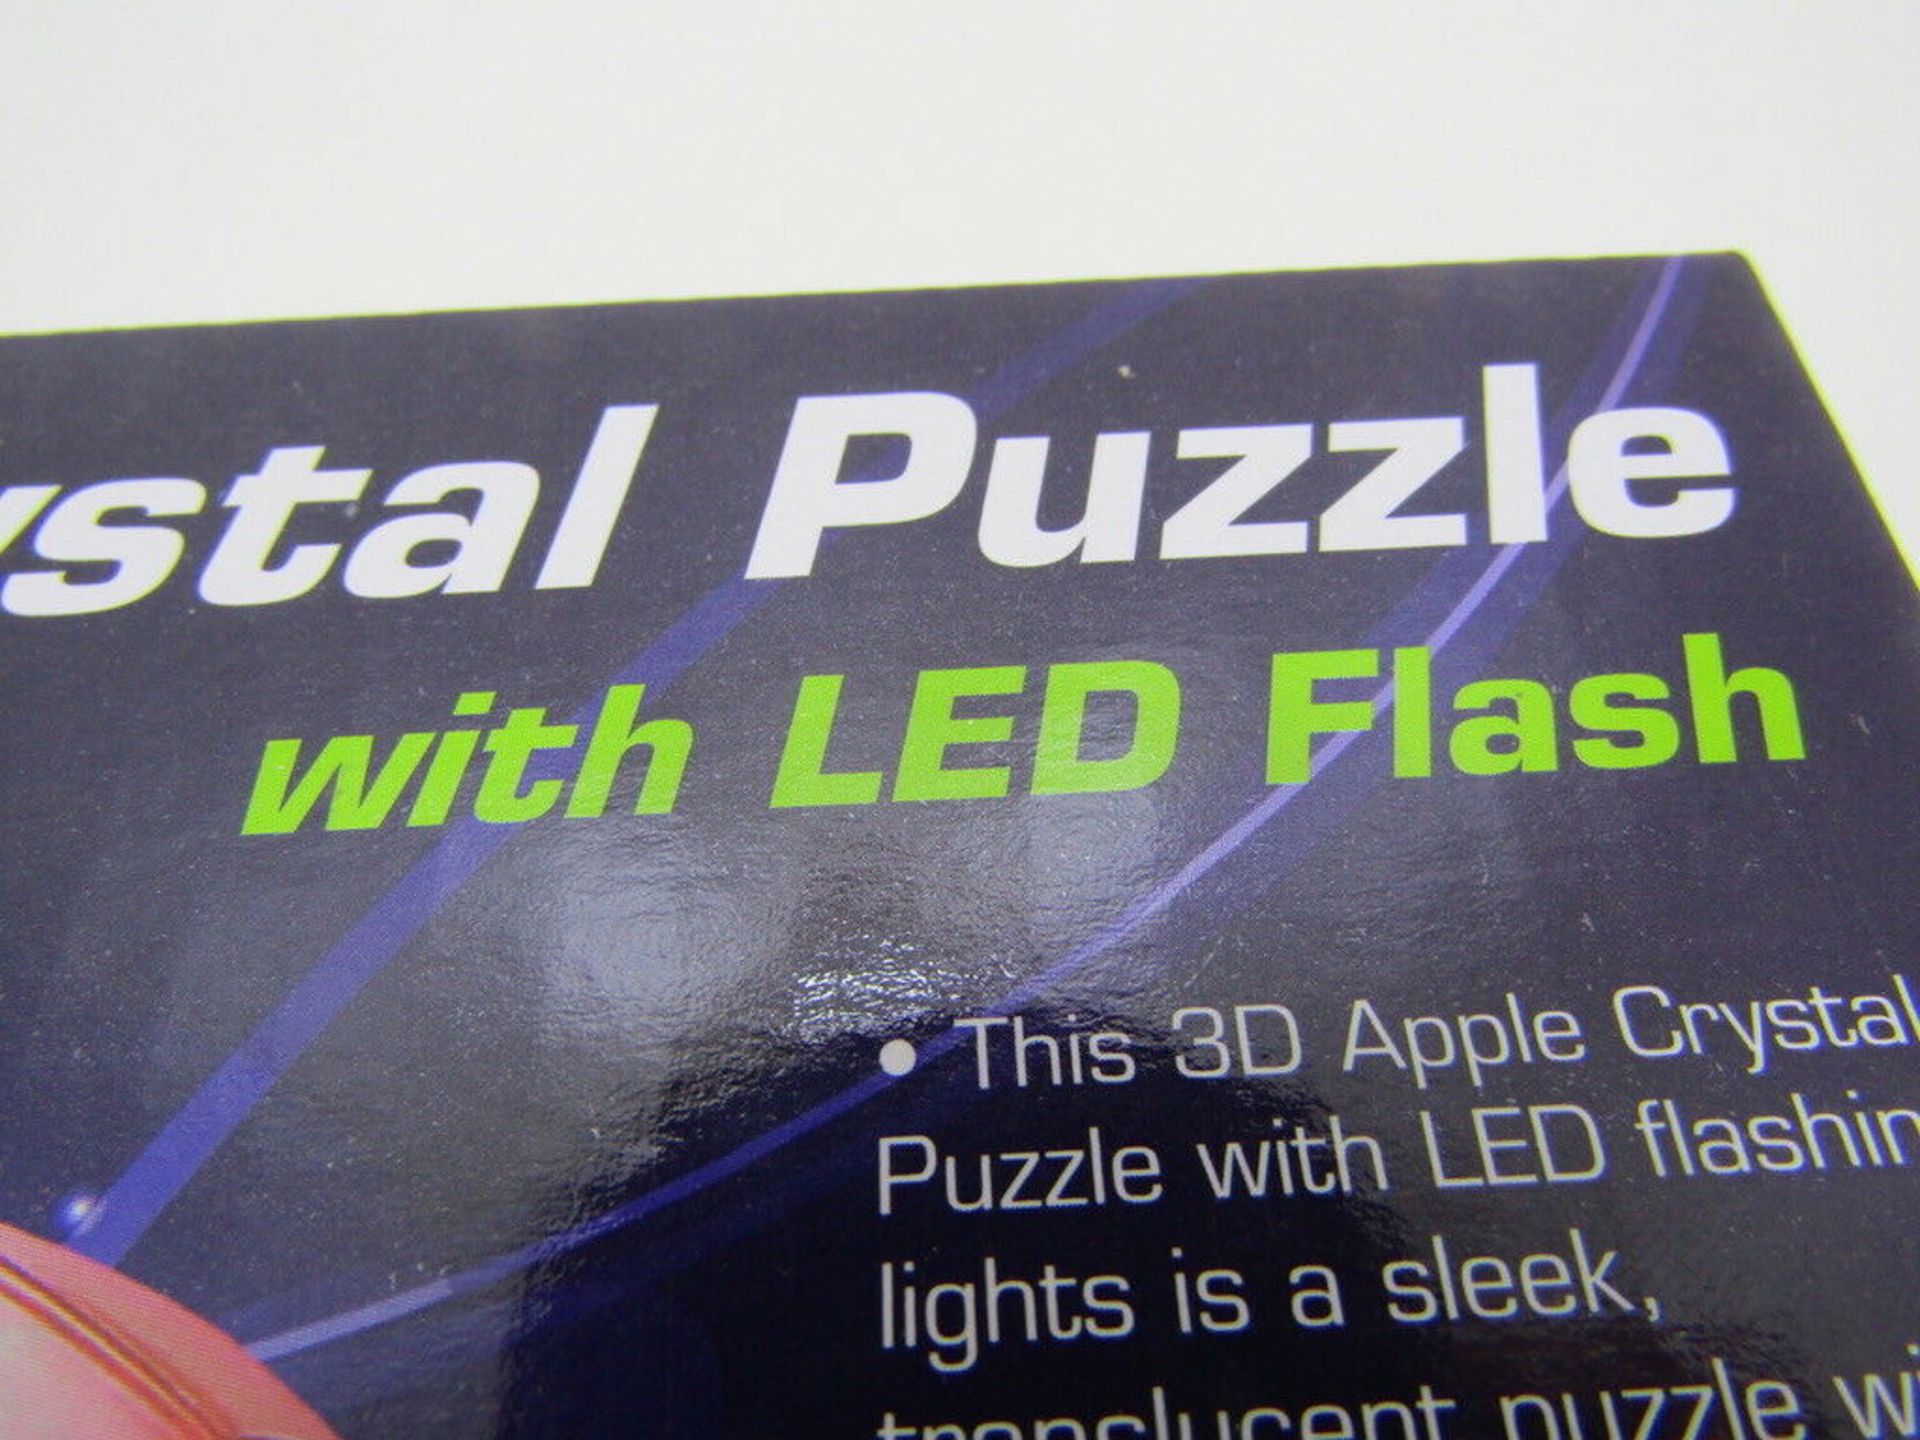 10 x 3D Jigsaw Puzzle. Red Apple with Flashing LED Lights incs Batteries - Image 4 of 4